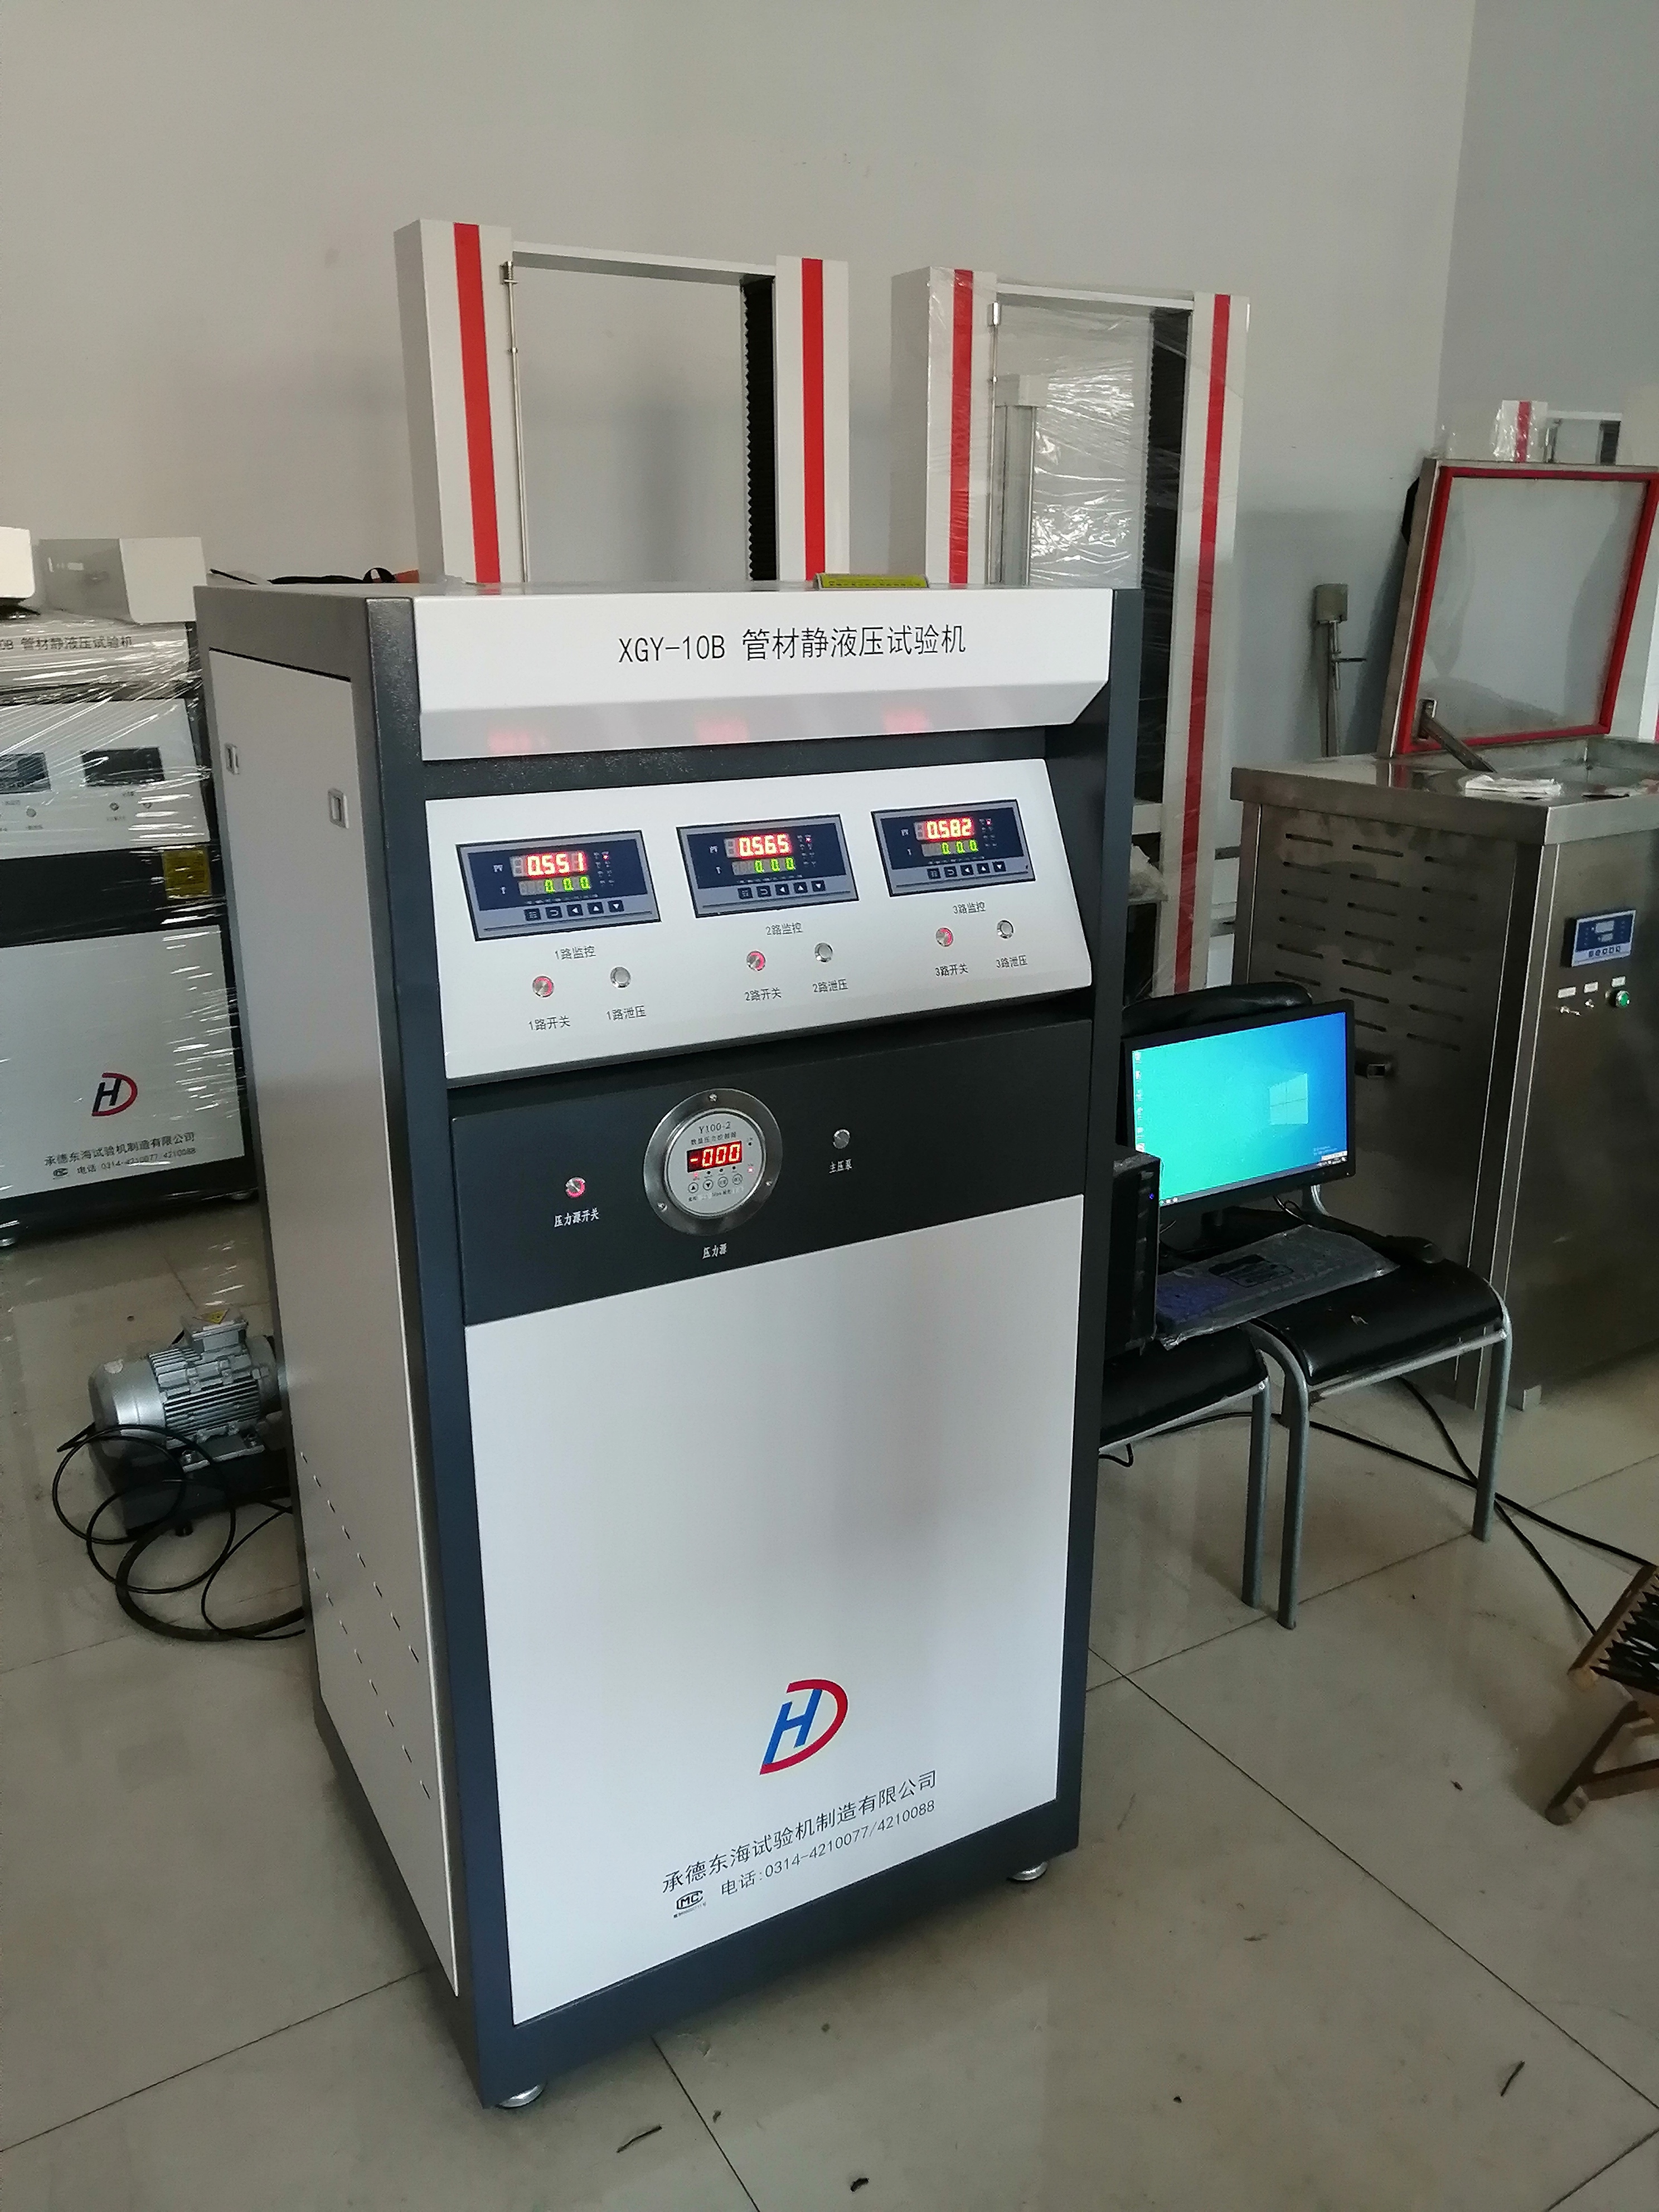 Supplied by the manufacturer of XGY-10B-6 plastic pipe pressure hydrostatic testing machine